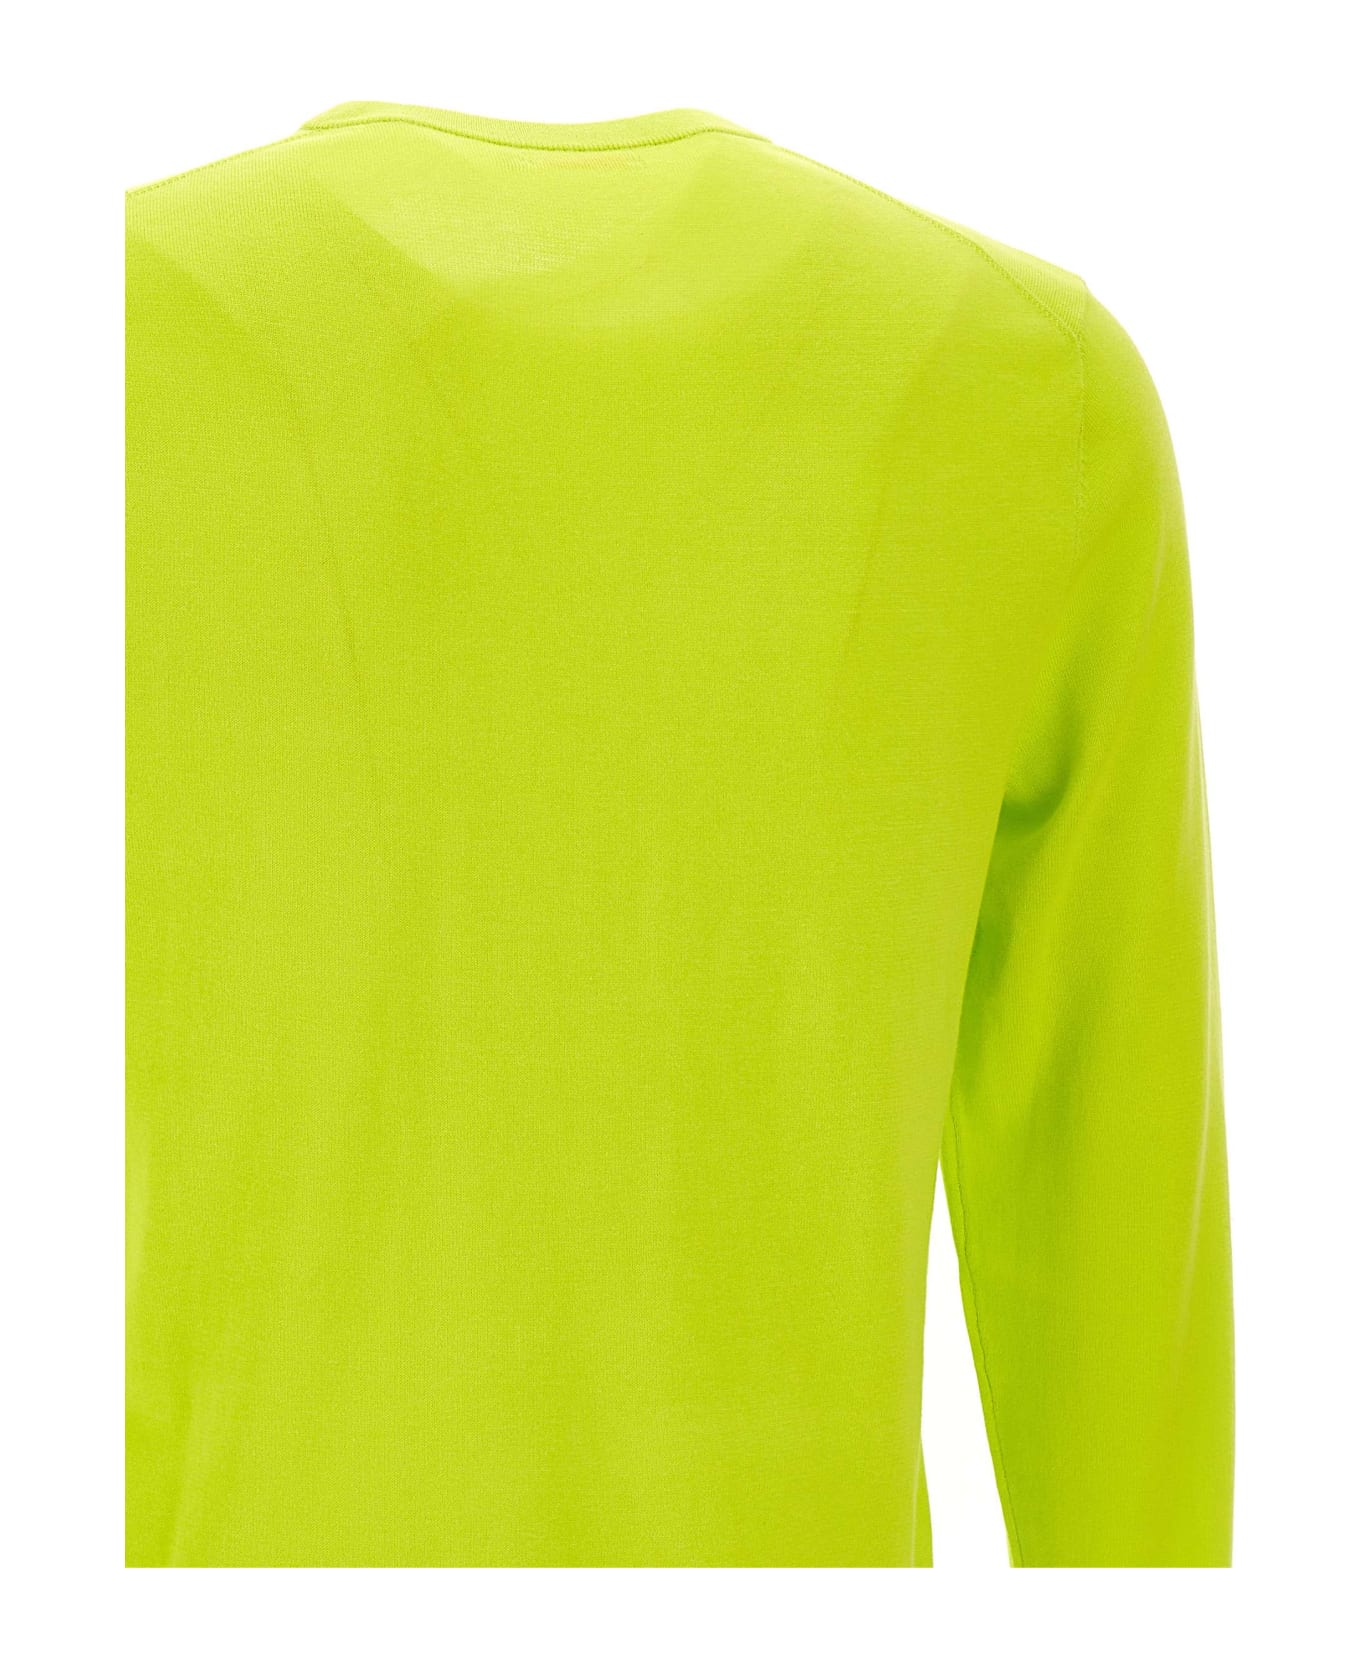 Sun 68 "solid" Cotton Sweater - GREEN